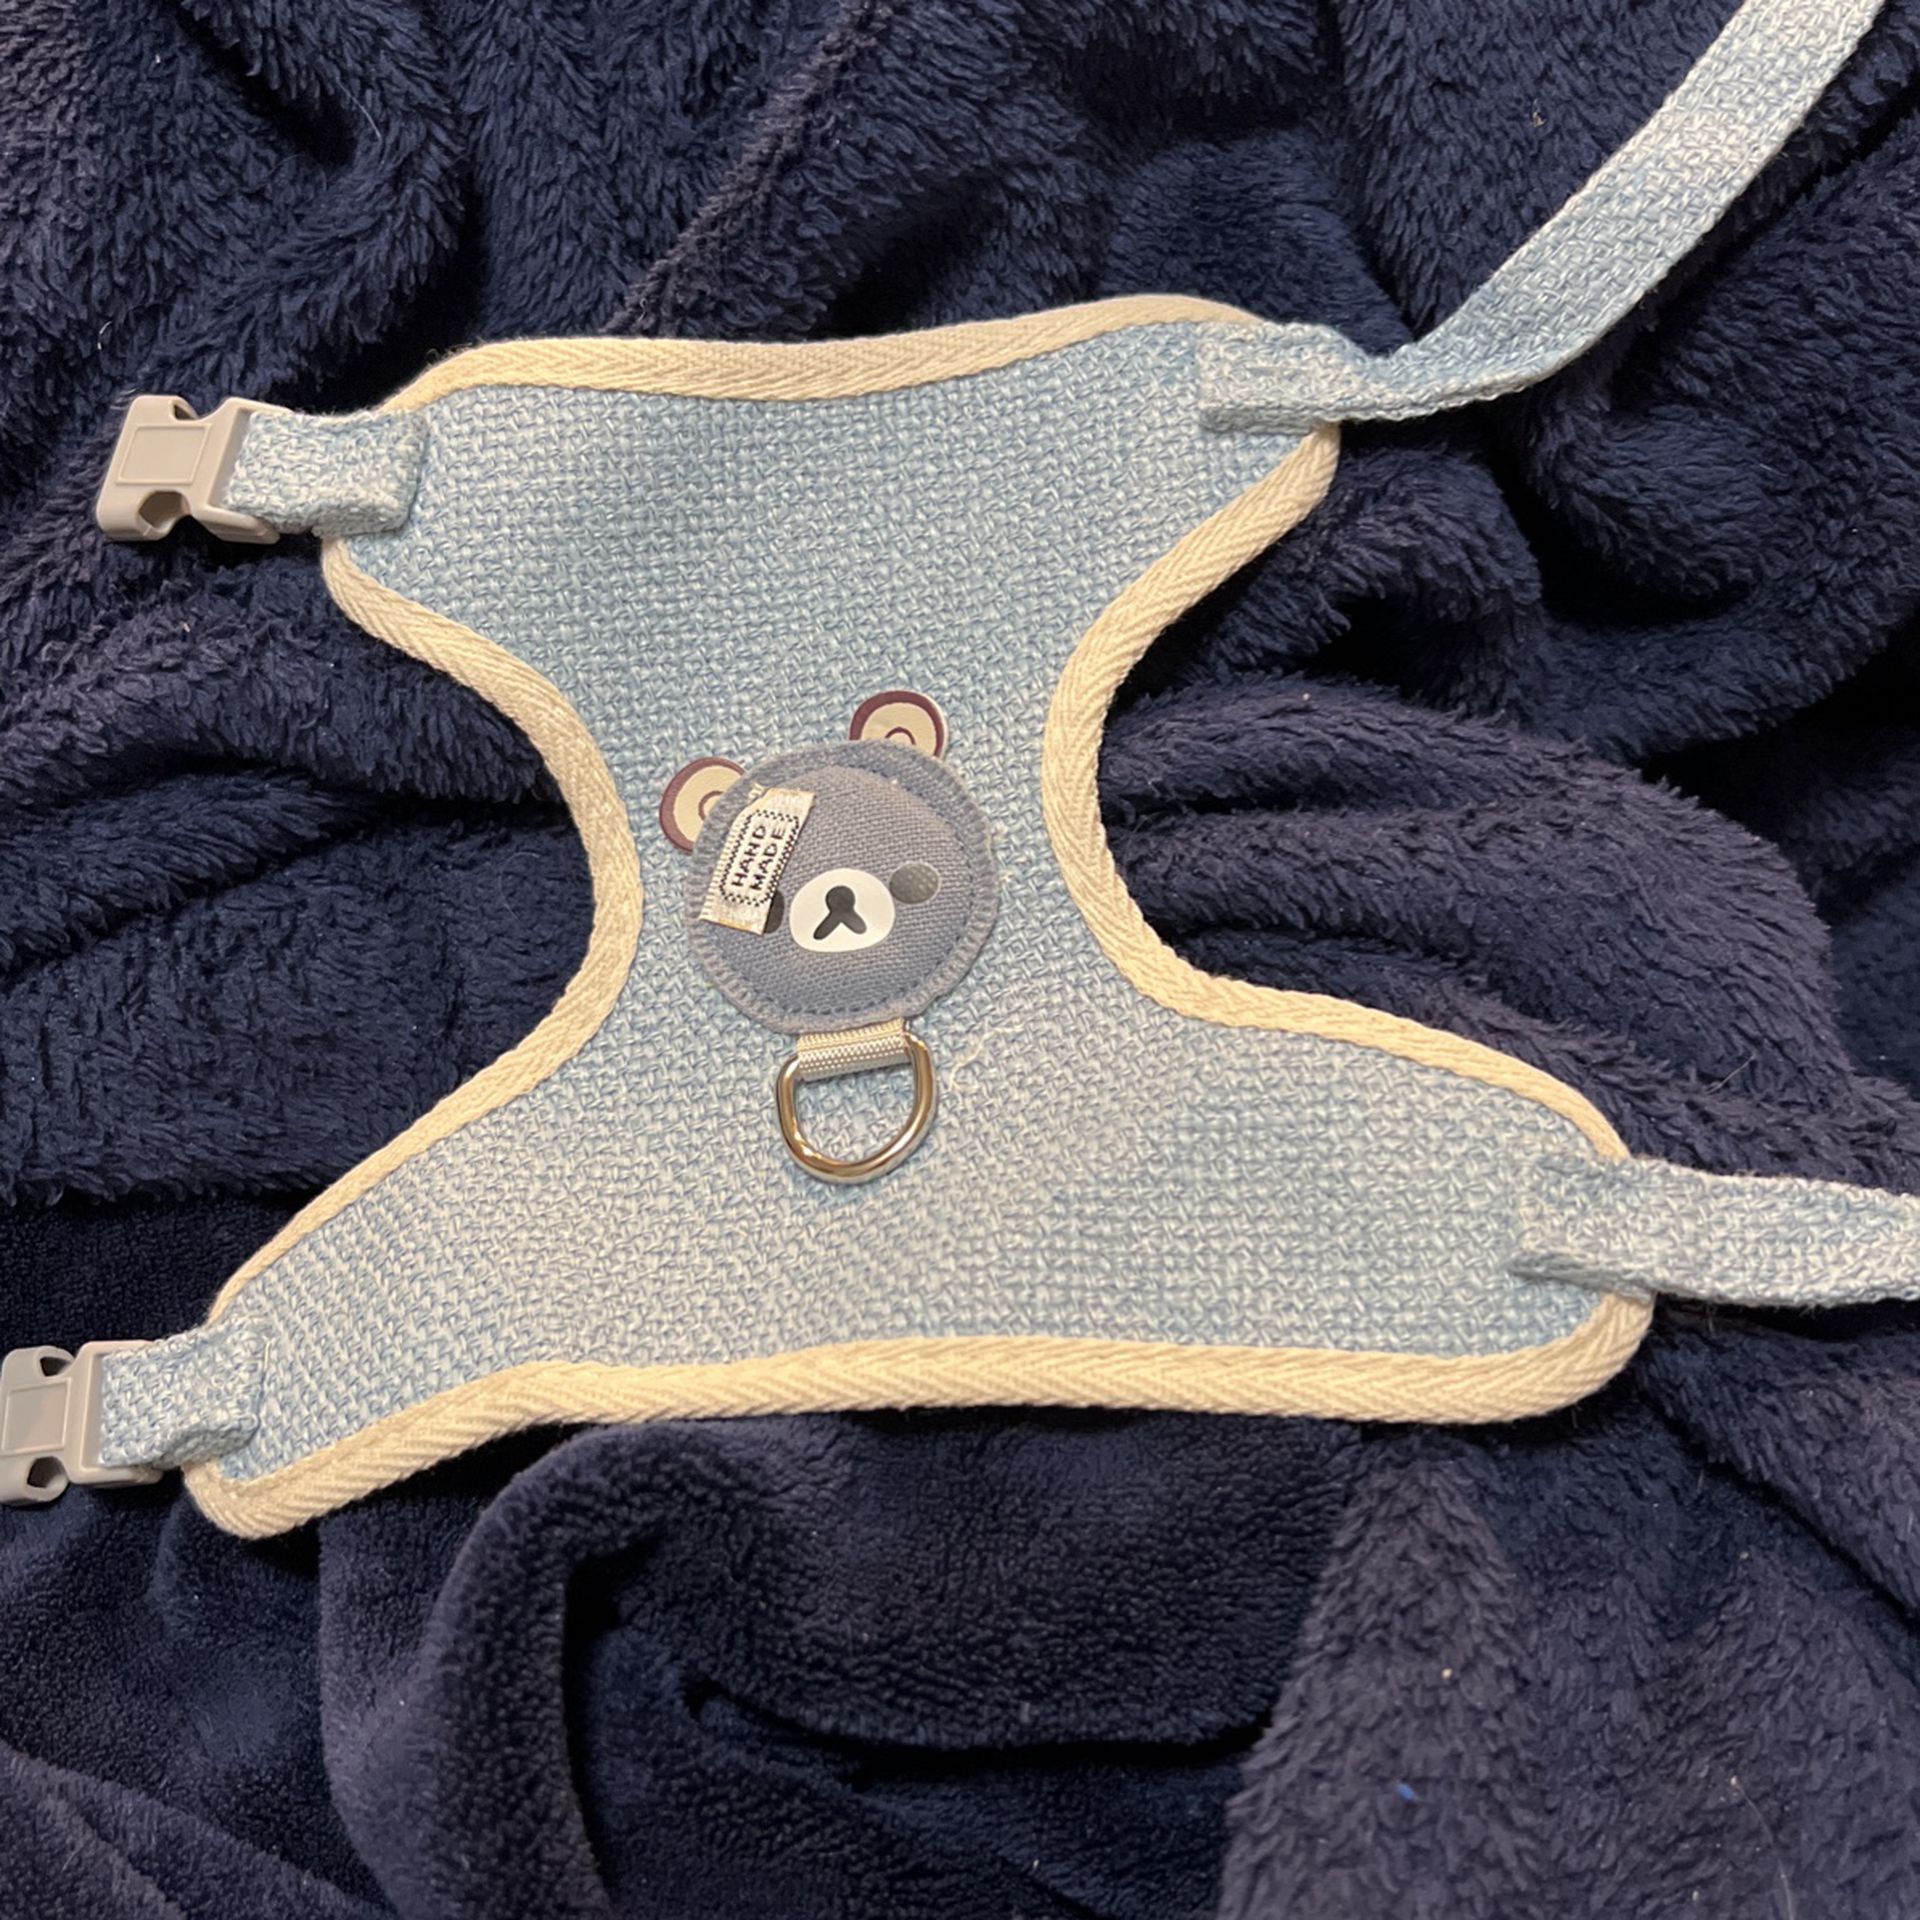 Cute Dog Harness For Medium Sized Dogs 